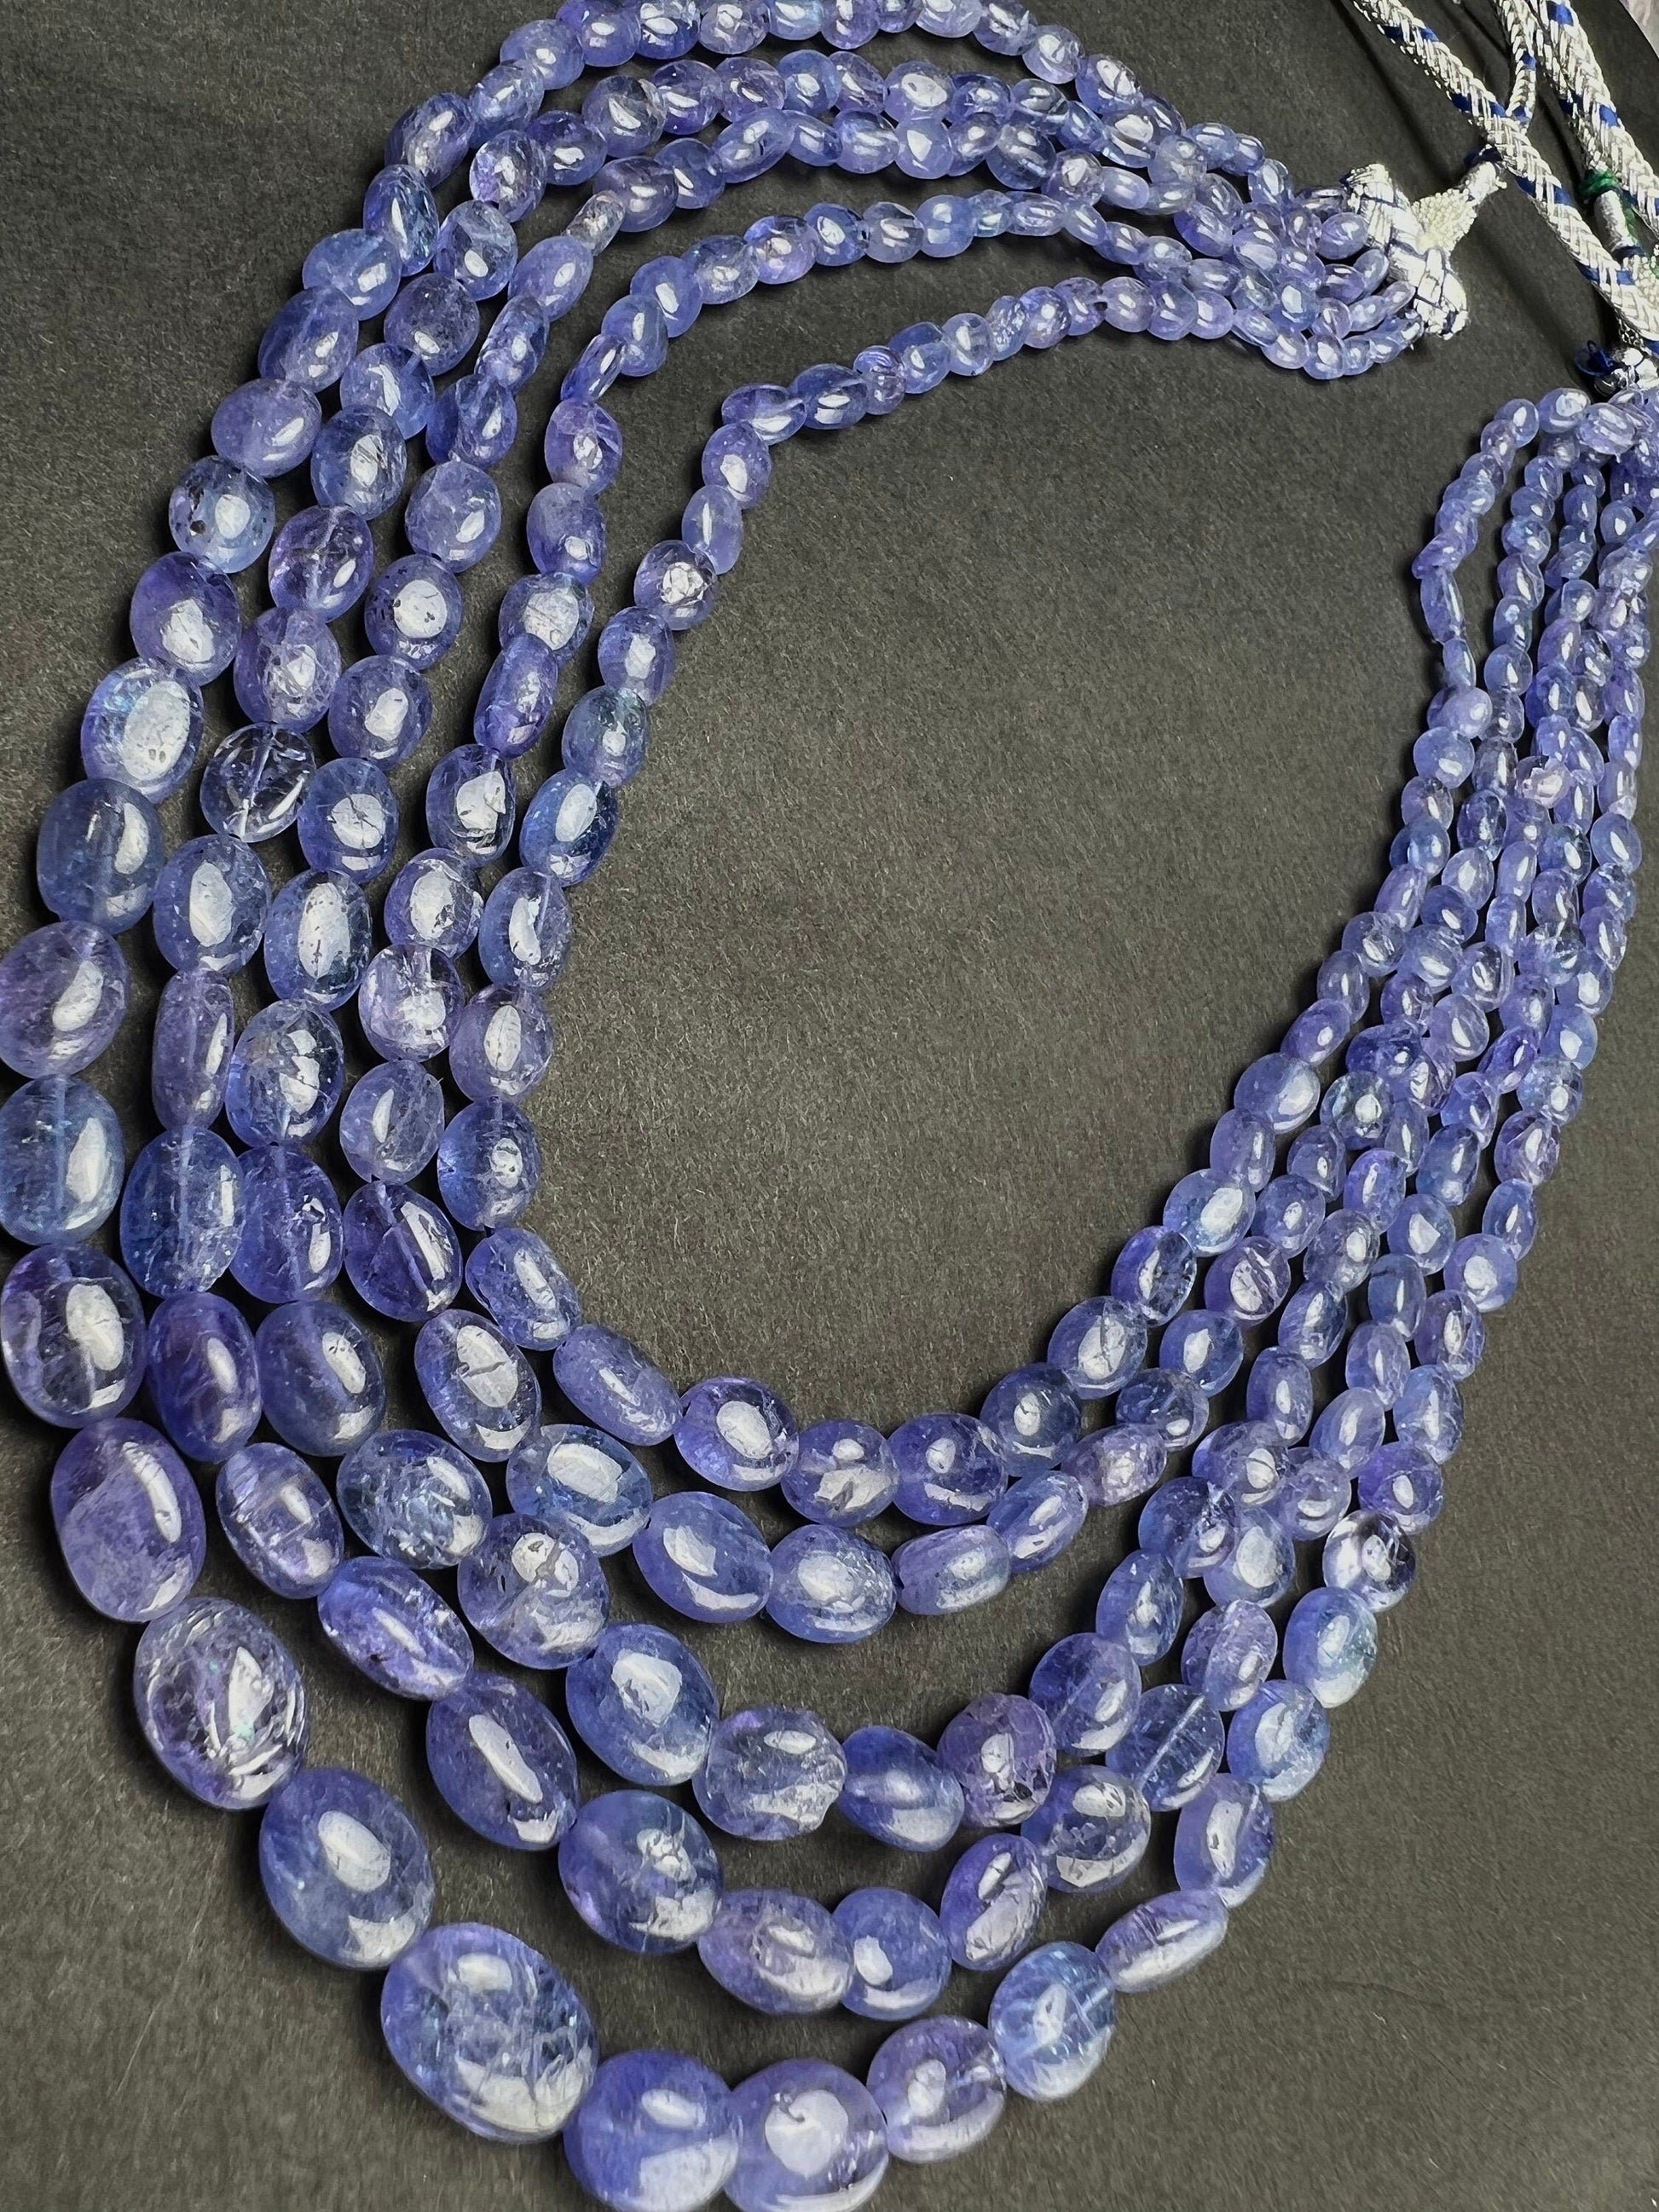 3, 5 line Tanzanite Smooth Oval 7-10mm Necklace,16&quot; -18”AAA quality natural Tanzanite oval bead with long adjustable Thread to 30&quot;